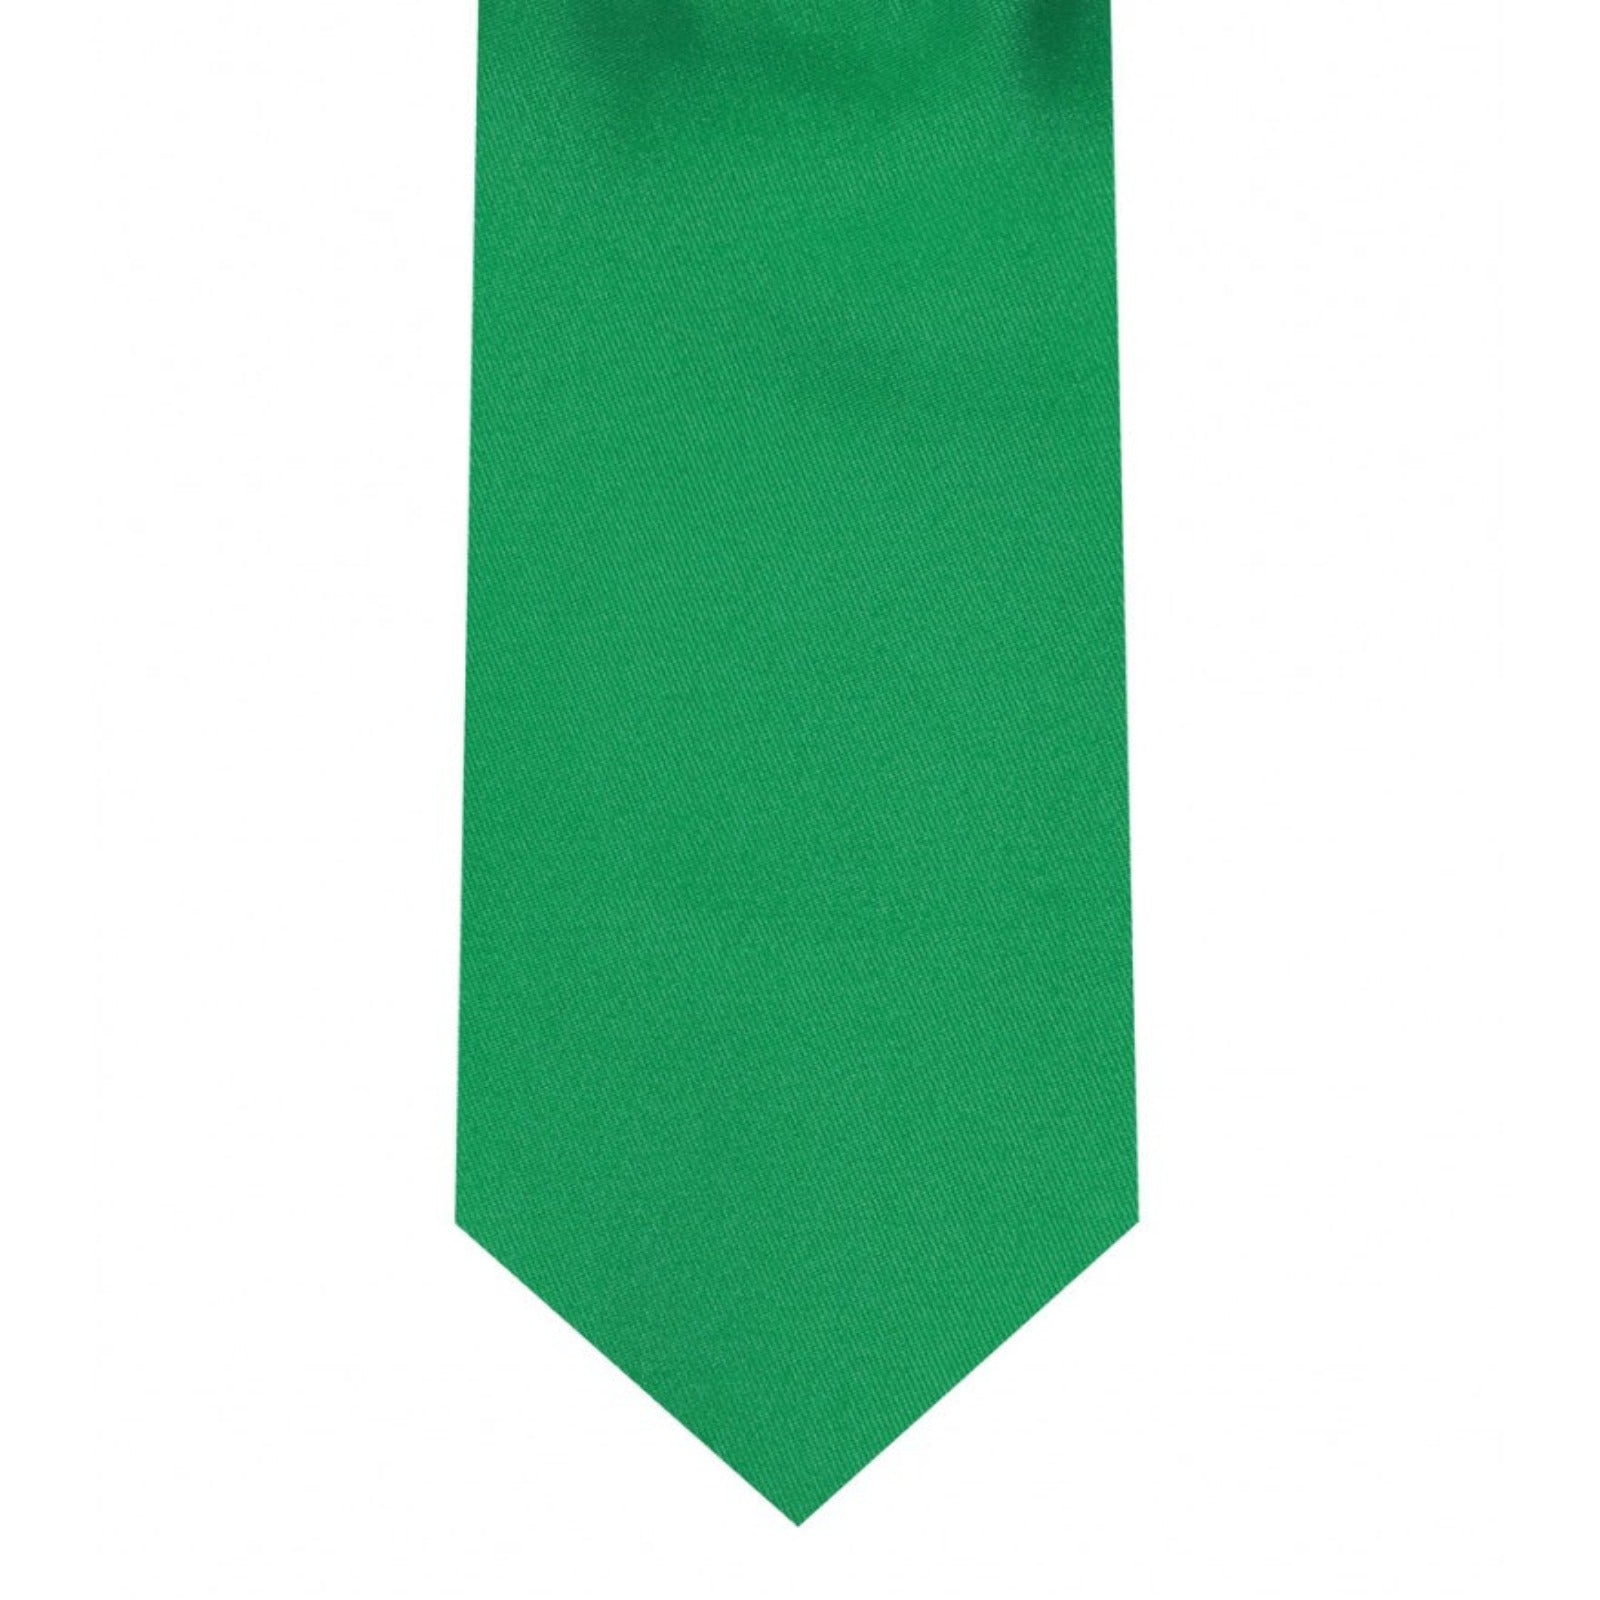 Classic Emerald Green Tie Skinny width 2.75 inches With Matching Pocket Square | KCT Menswear